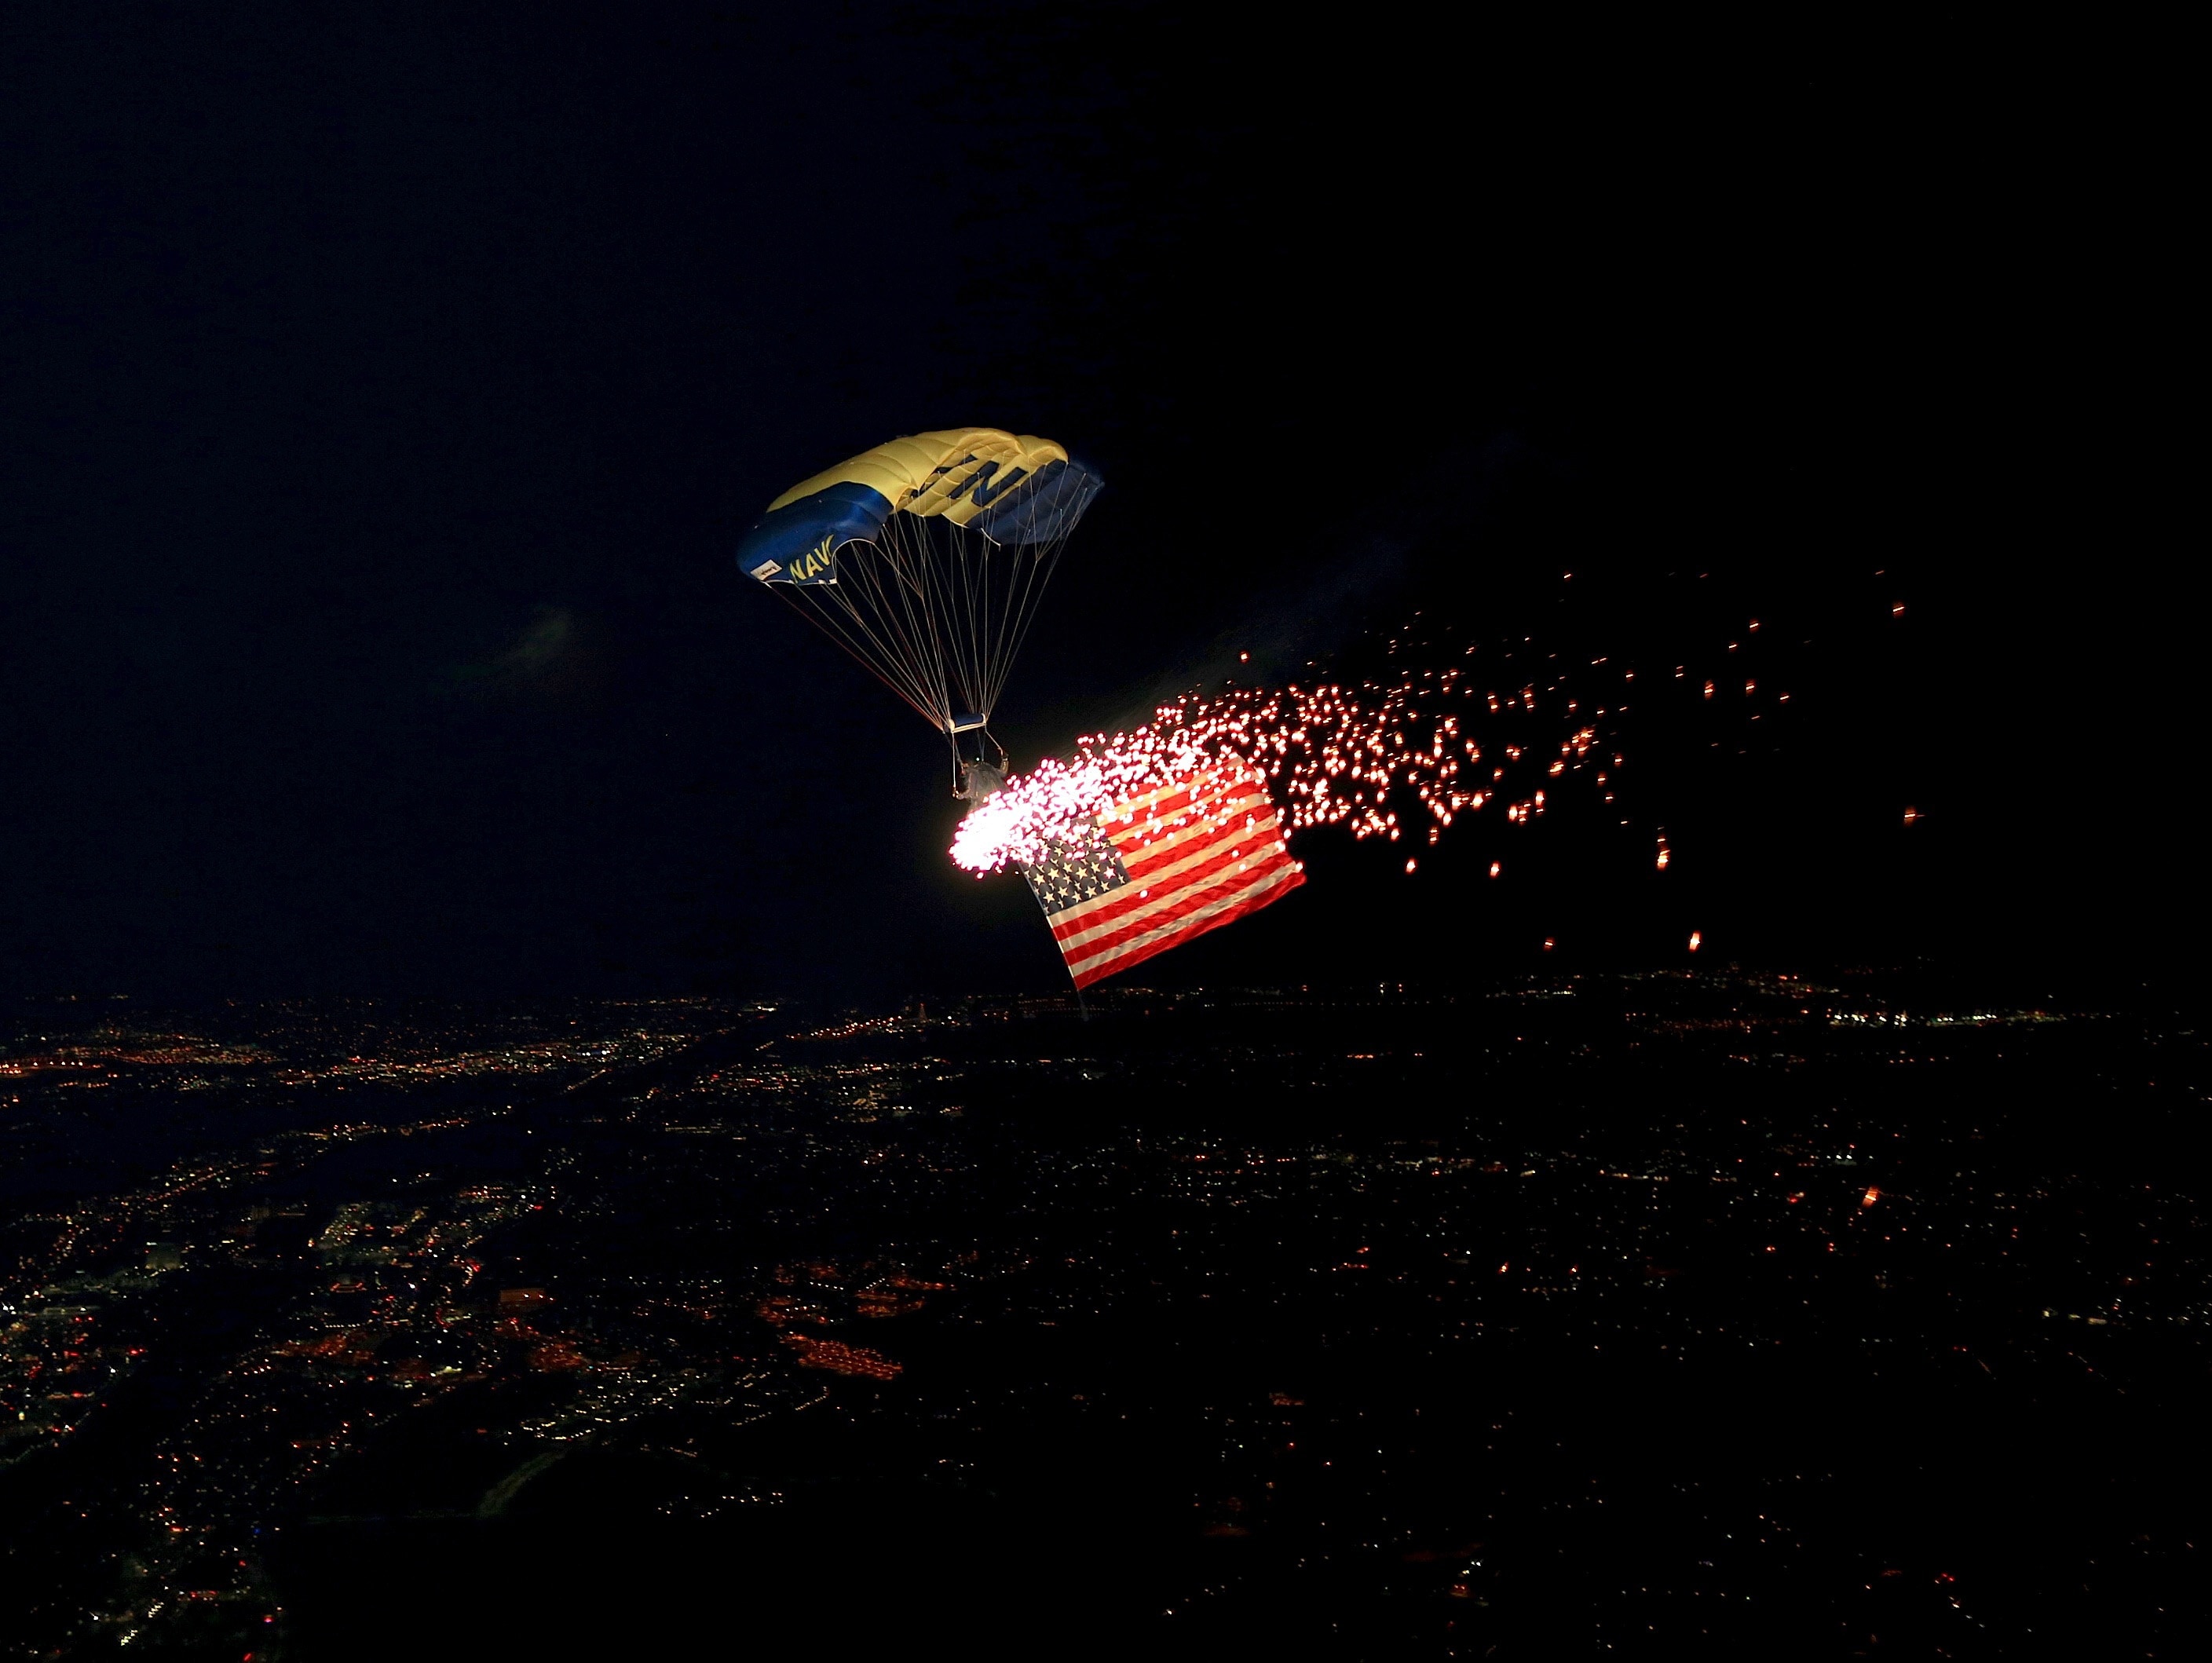 u.s.a flag and blue and yellow parachute